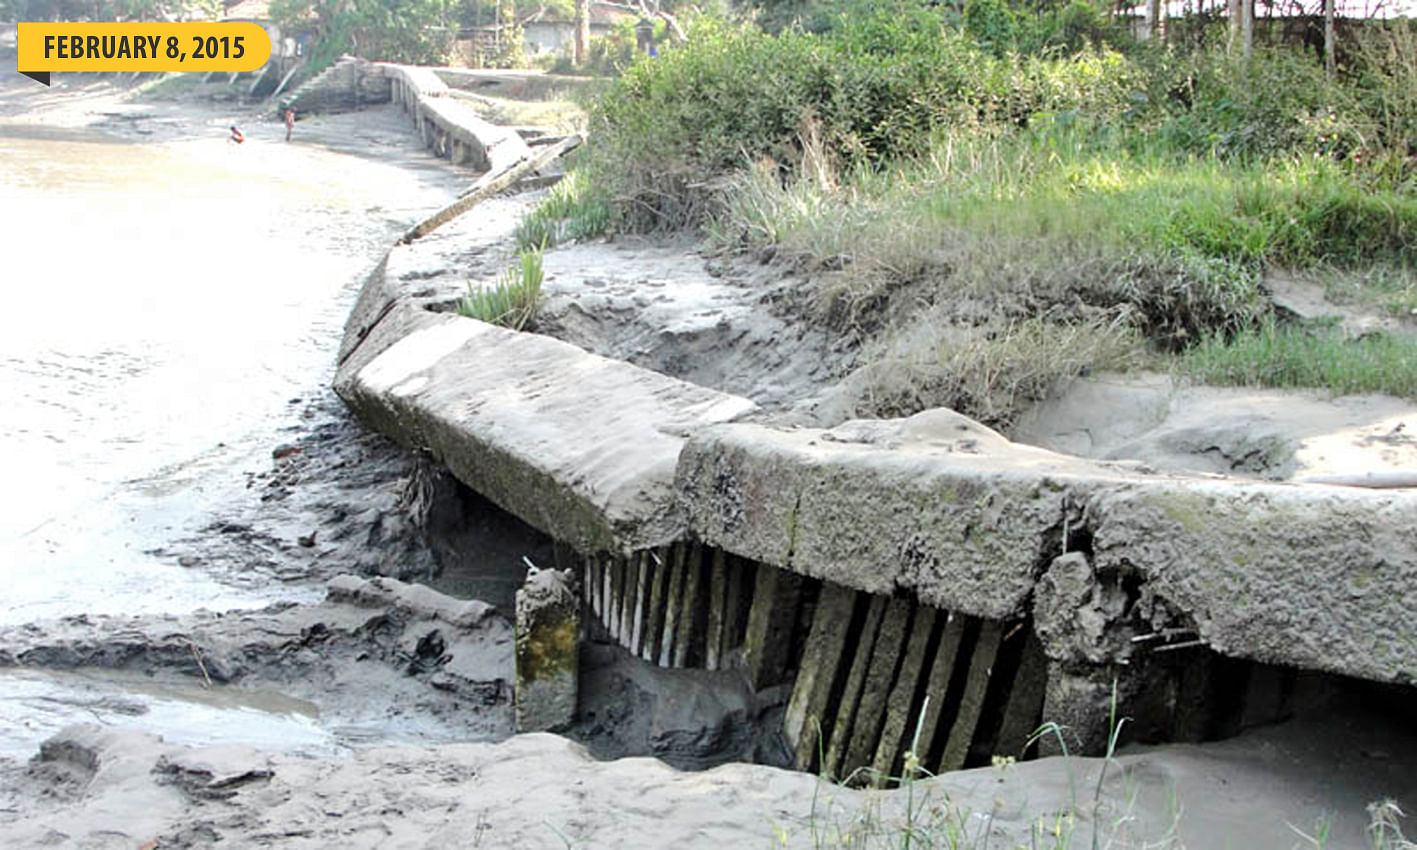 The Khulna city protection embankment has been slowly going into the Bhairab River over the last couple of years. The Daily Star reported it twice--in 2013 and again in 2014--within the space of one year. Each time, the local officials of the Water Development Board, its custodian, said they asked for Tk 22.19 crore from the headquarters in 2011 to rehabilitate the structure, which is protecting the citys eastern fringe from flooding. But the fund has not been available yet. Meanwhile, local businessmen and social activists repeatedly blamed use of substandard construction materials for the early damage to the embankment, which was built only in 2000 and was supposed to last four or five decades. Photos: Star